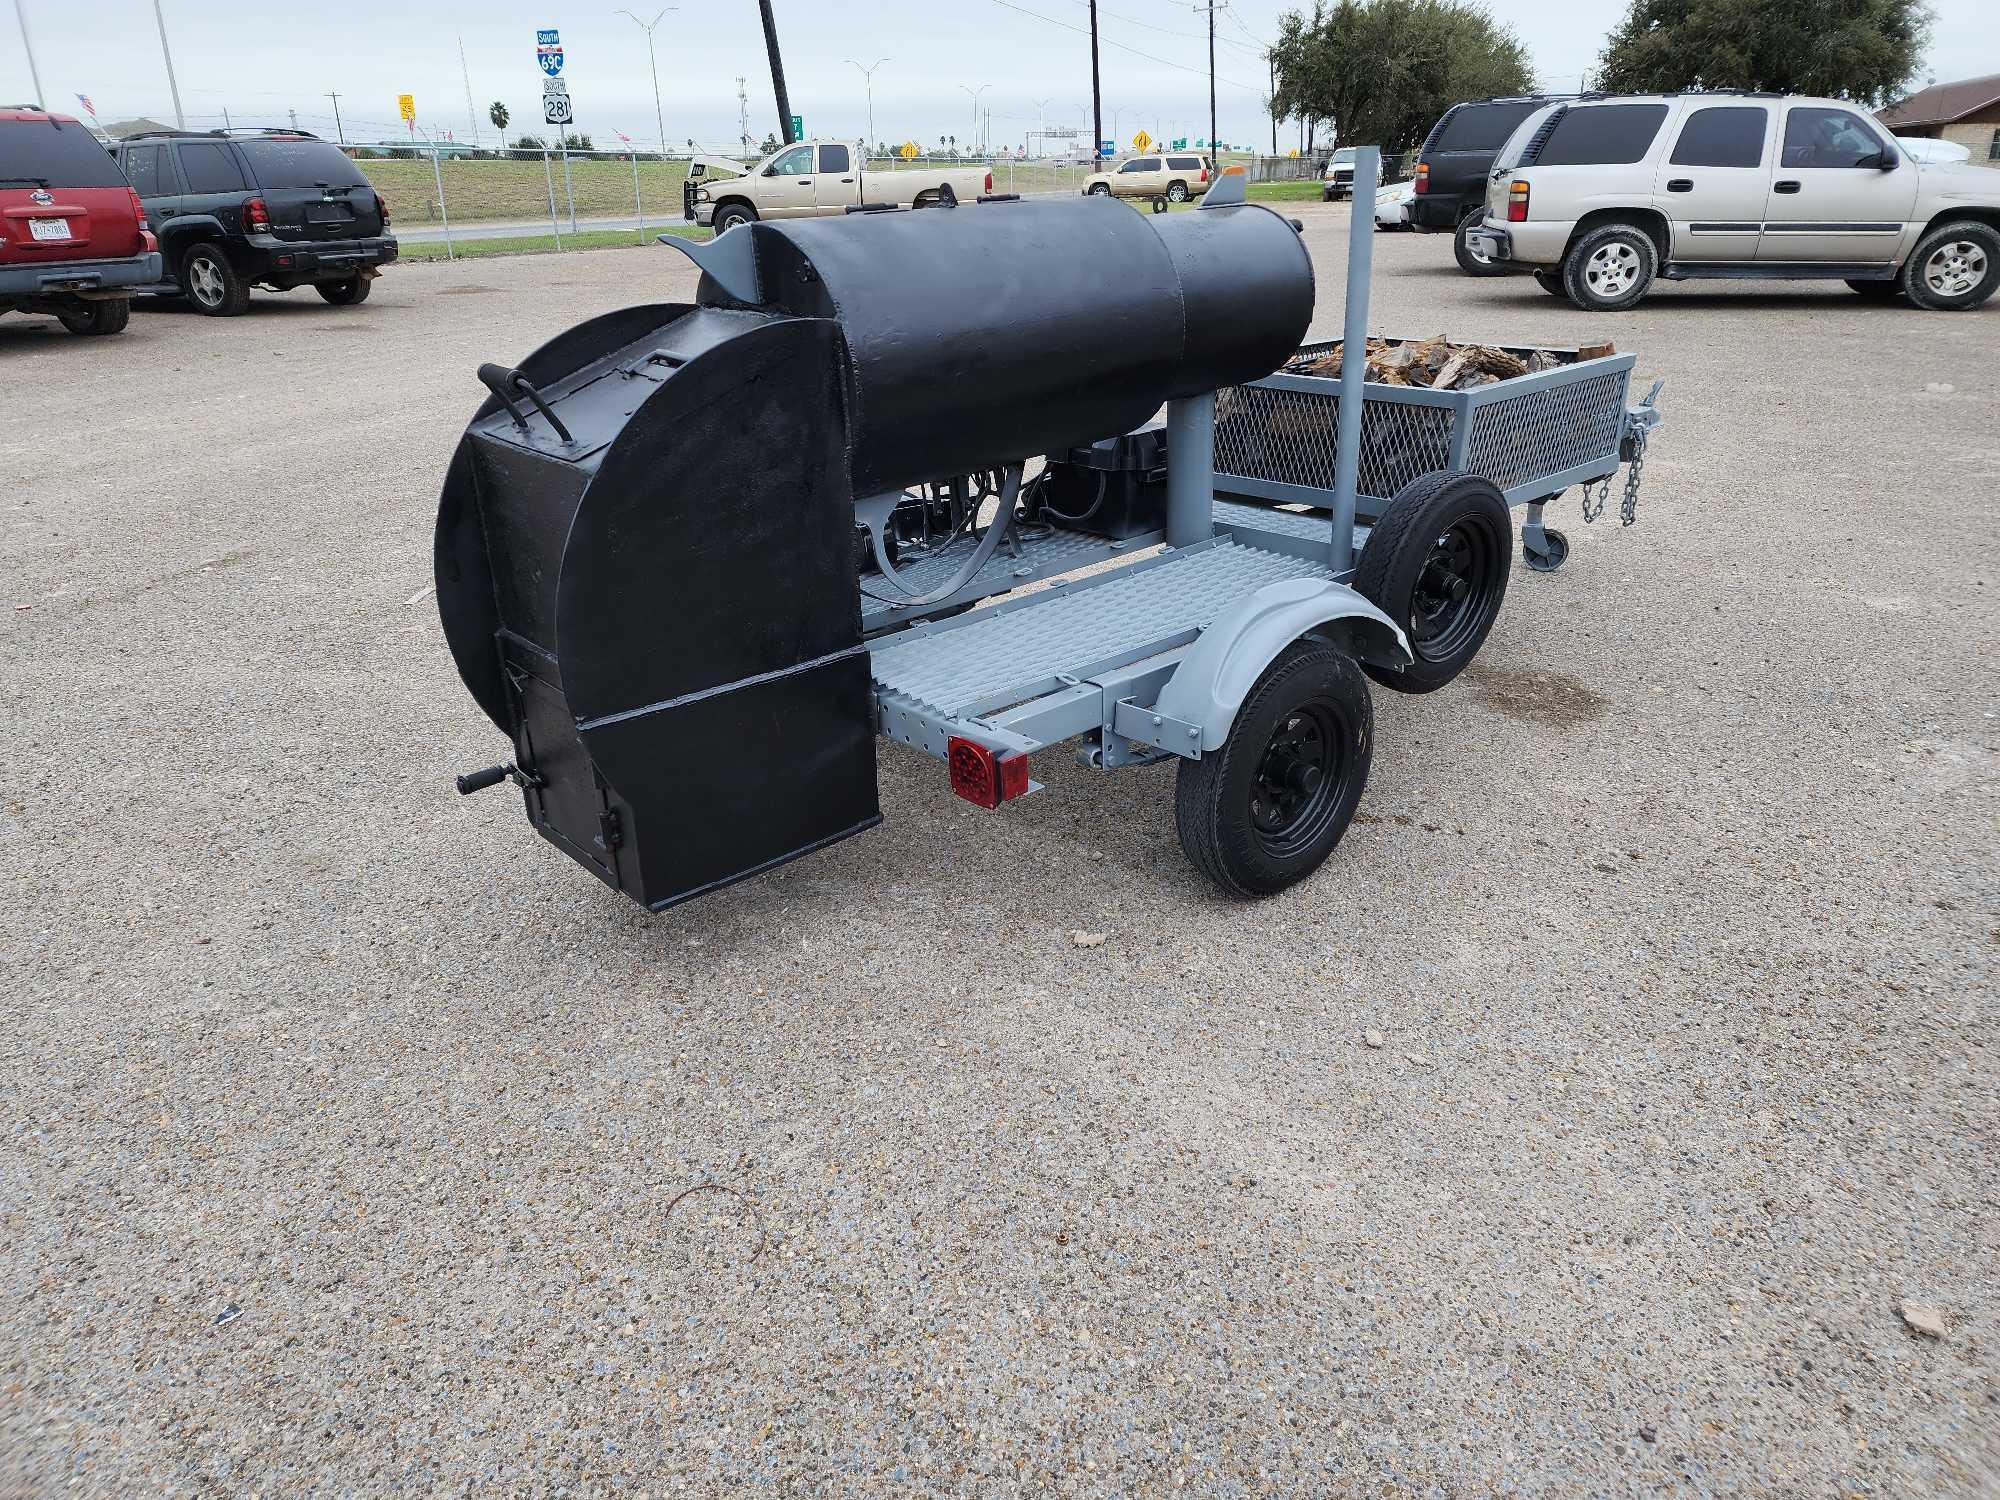 1/4 Steel BBQ Pit Smoker Made to Look Like a Pistol